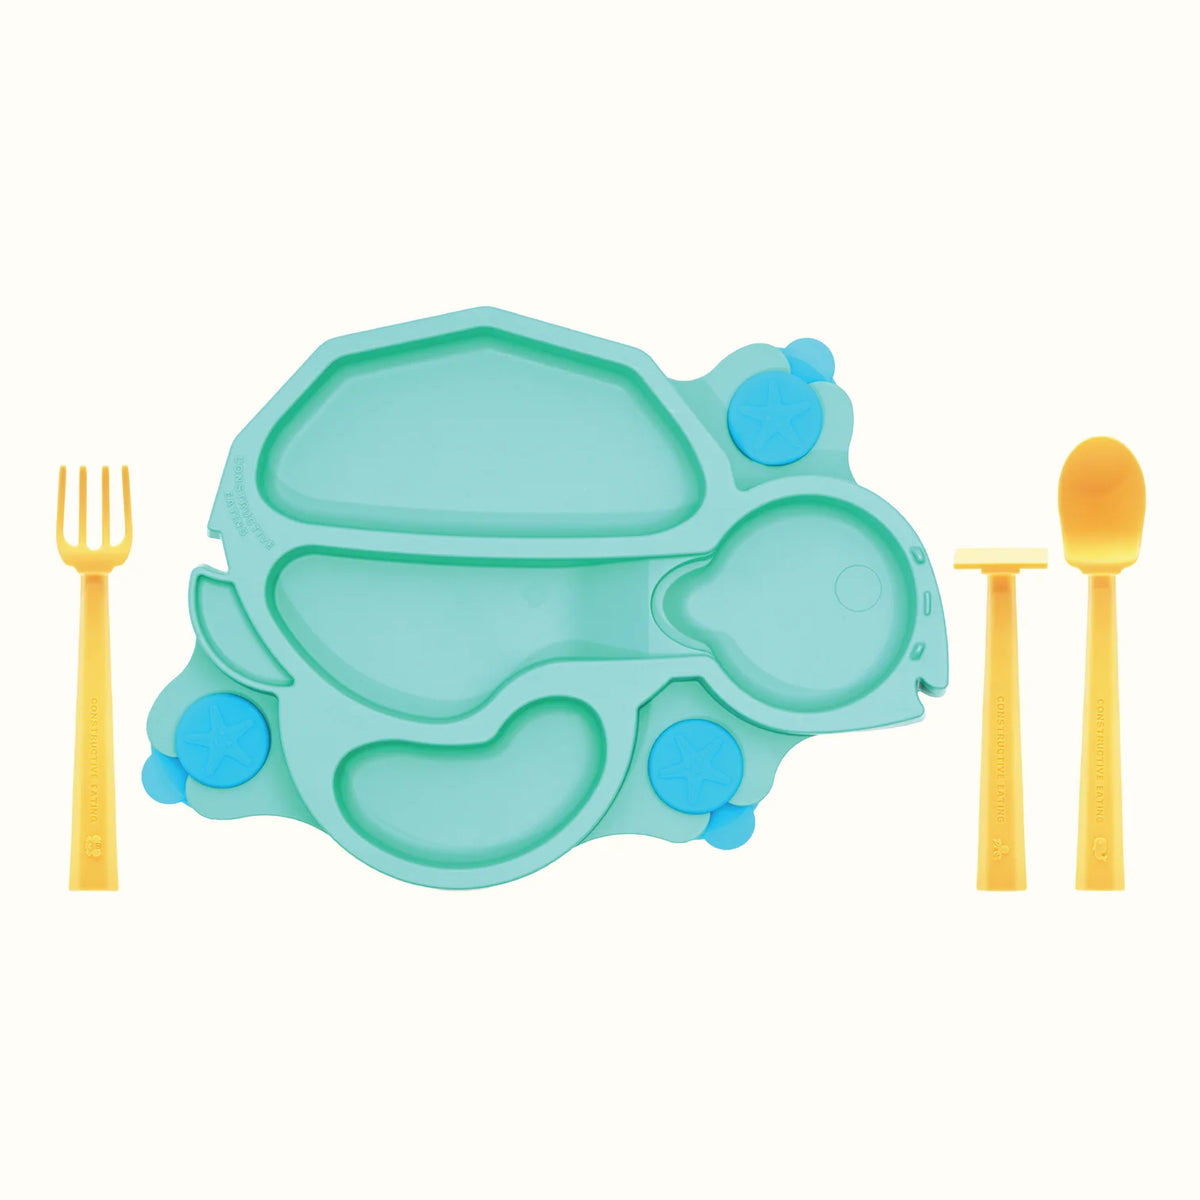 The Turtle Plate Cover